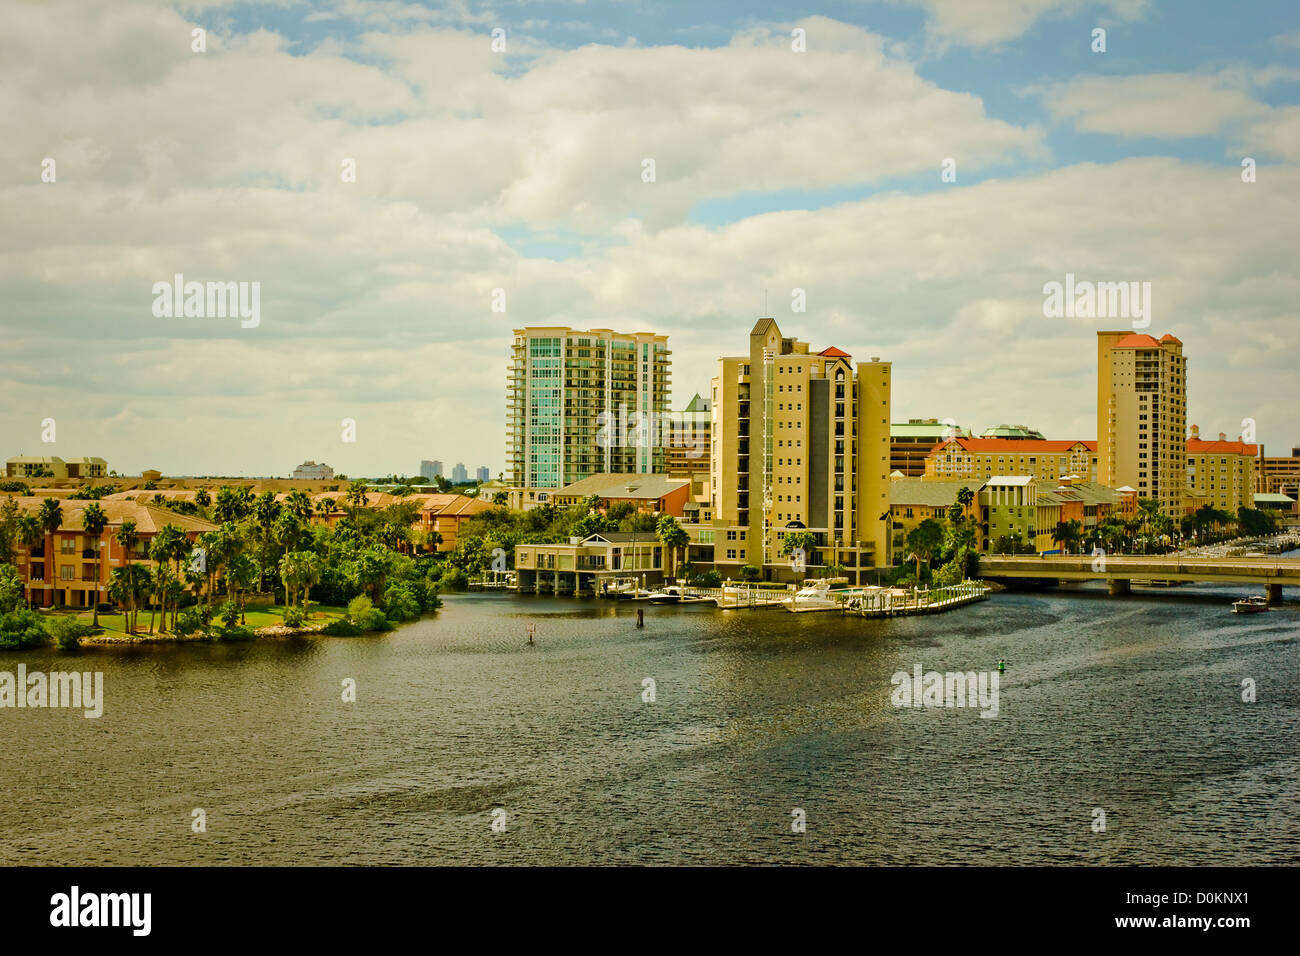 Our view at the Port of Tampa as we boarded a cruise ship. Stock Photo